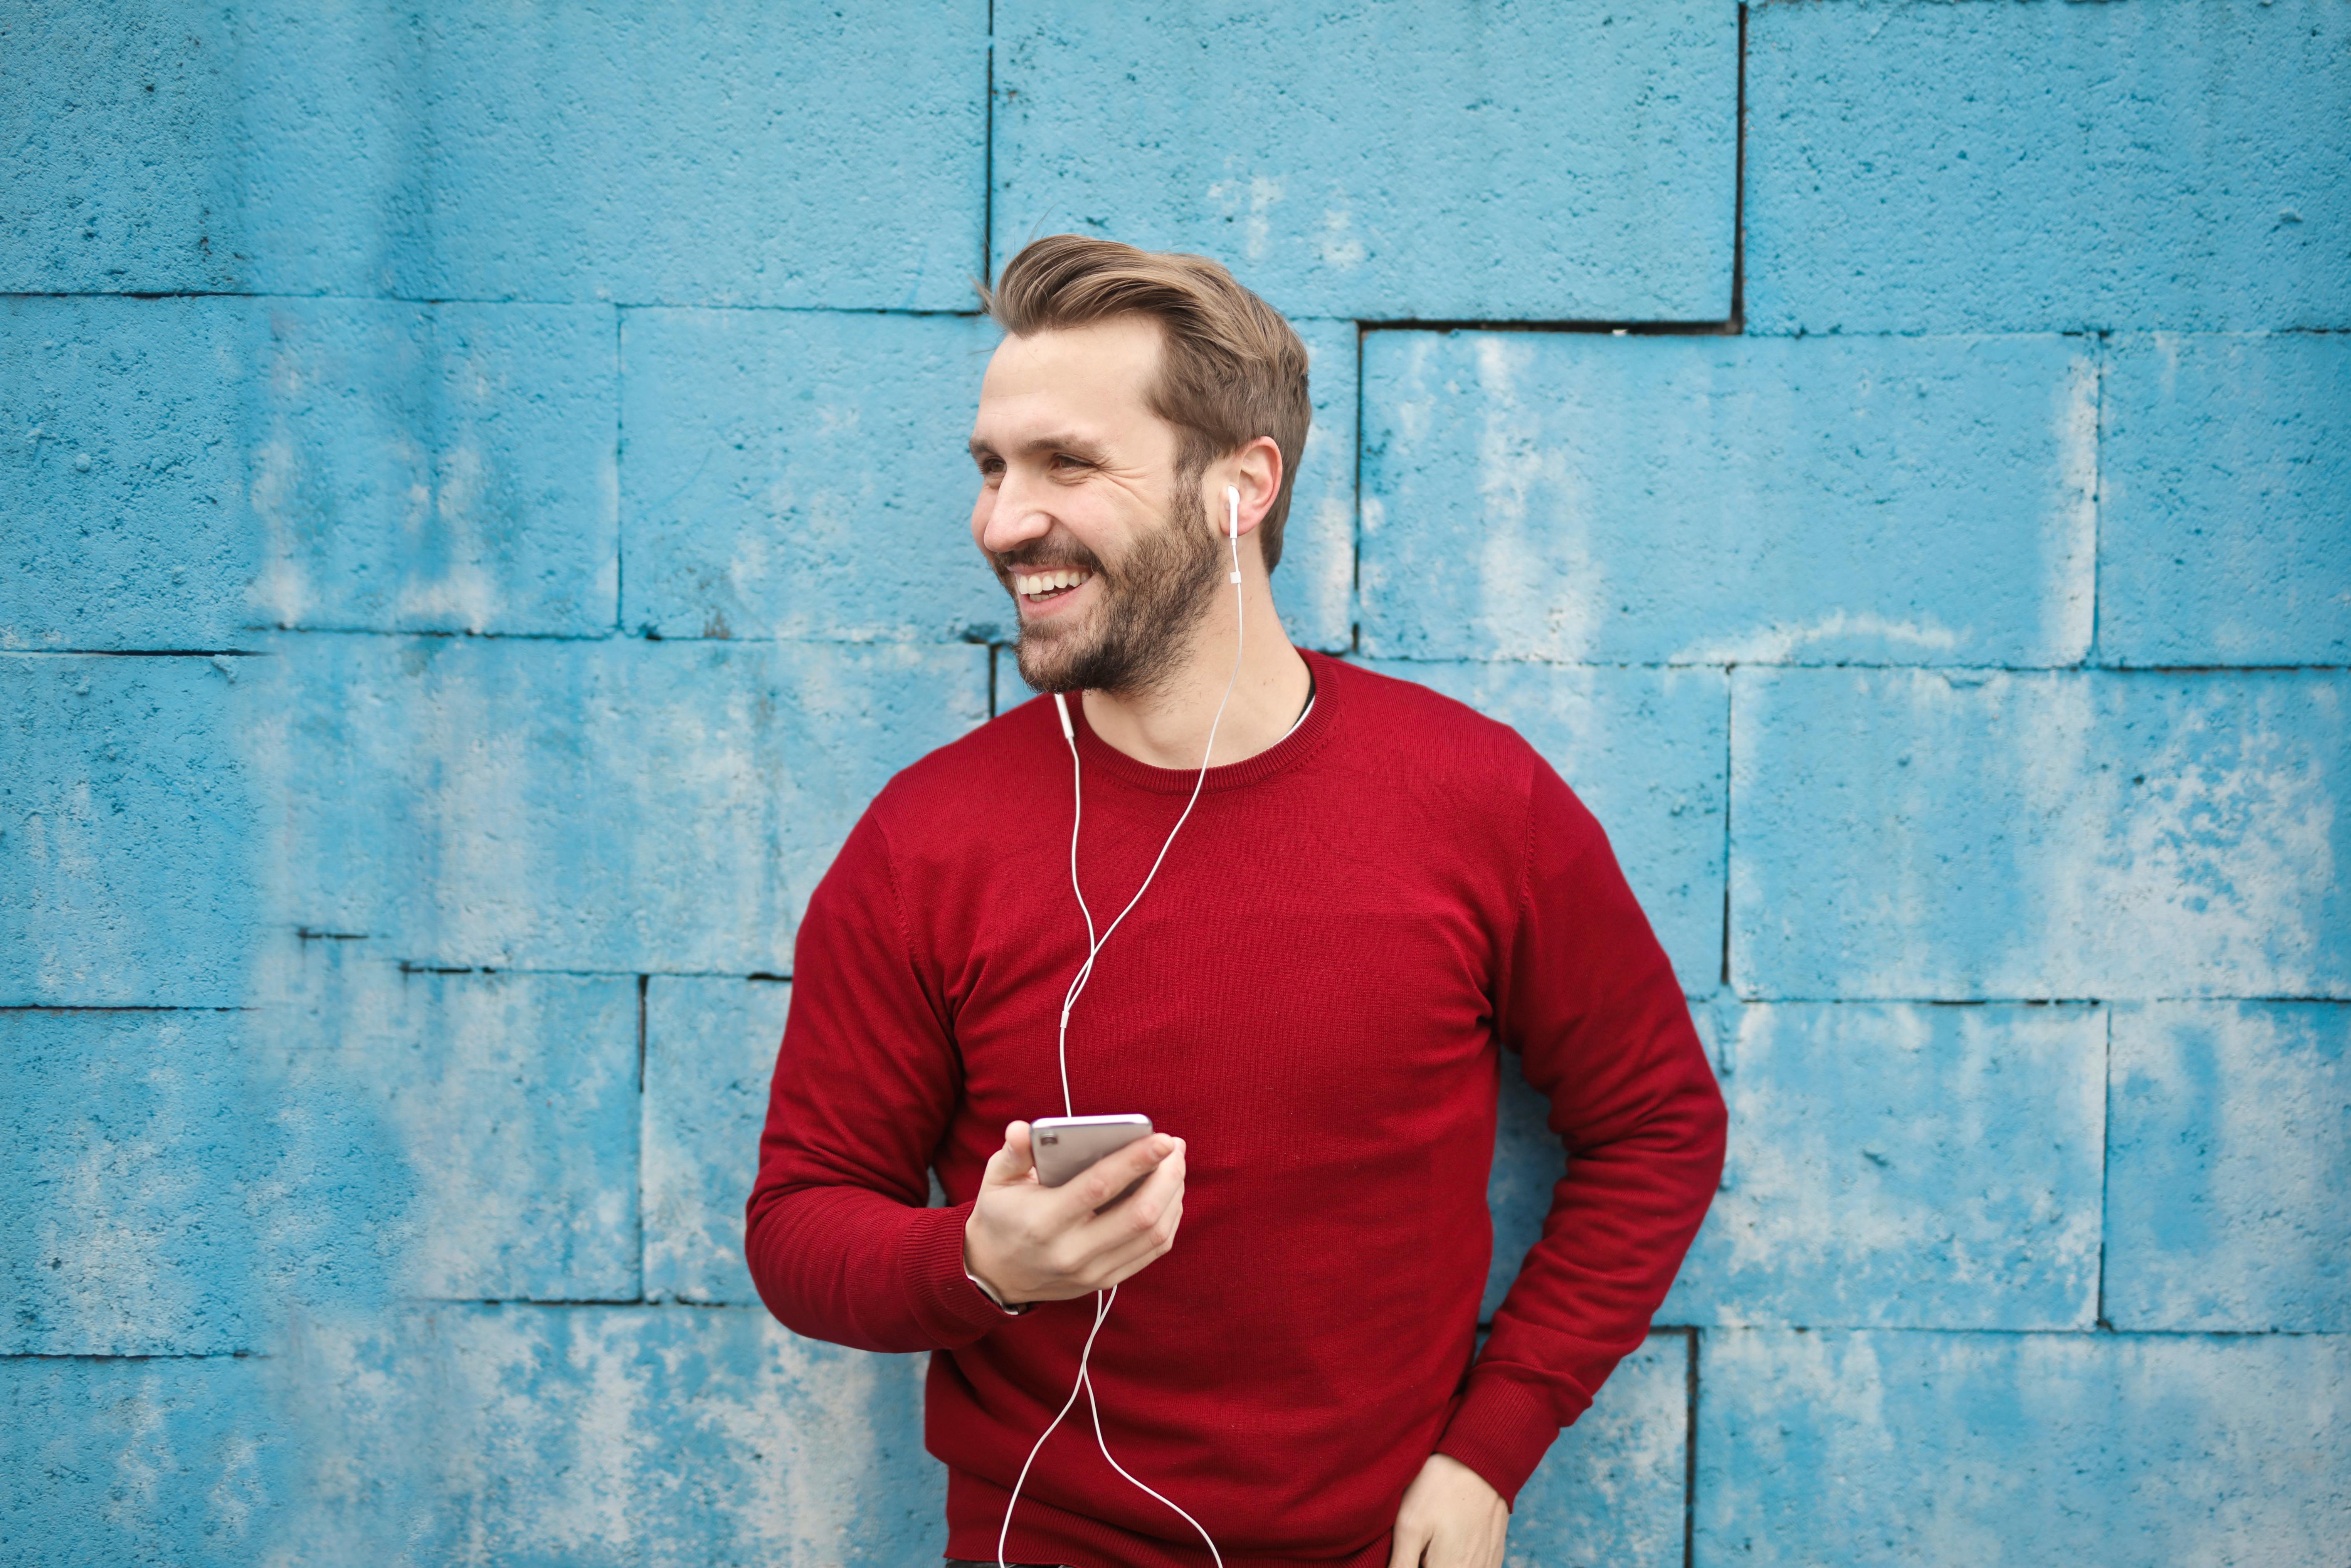 A confident man listening to music | Source: Pexels